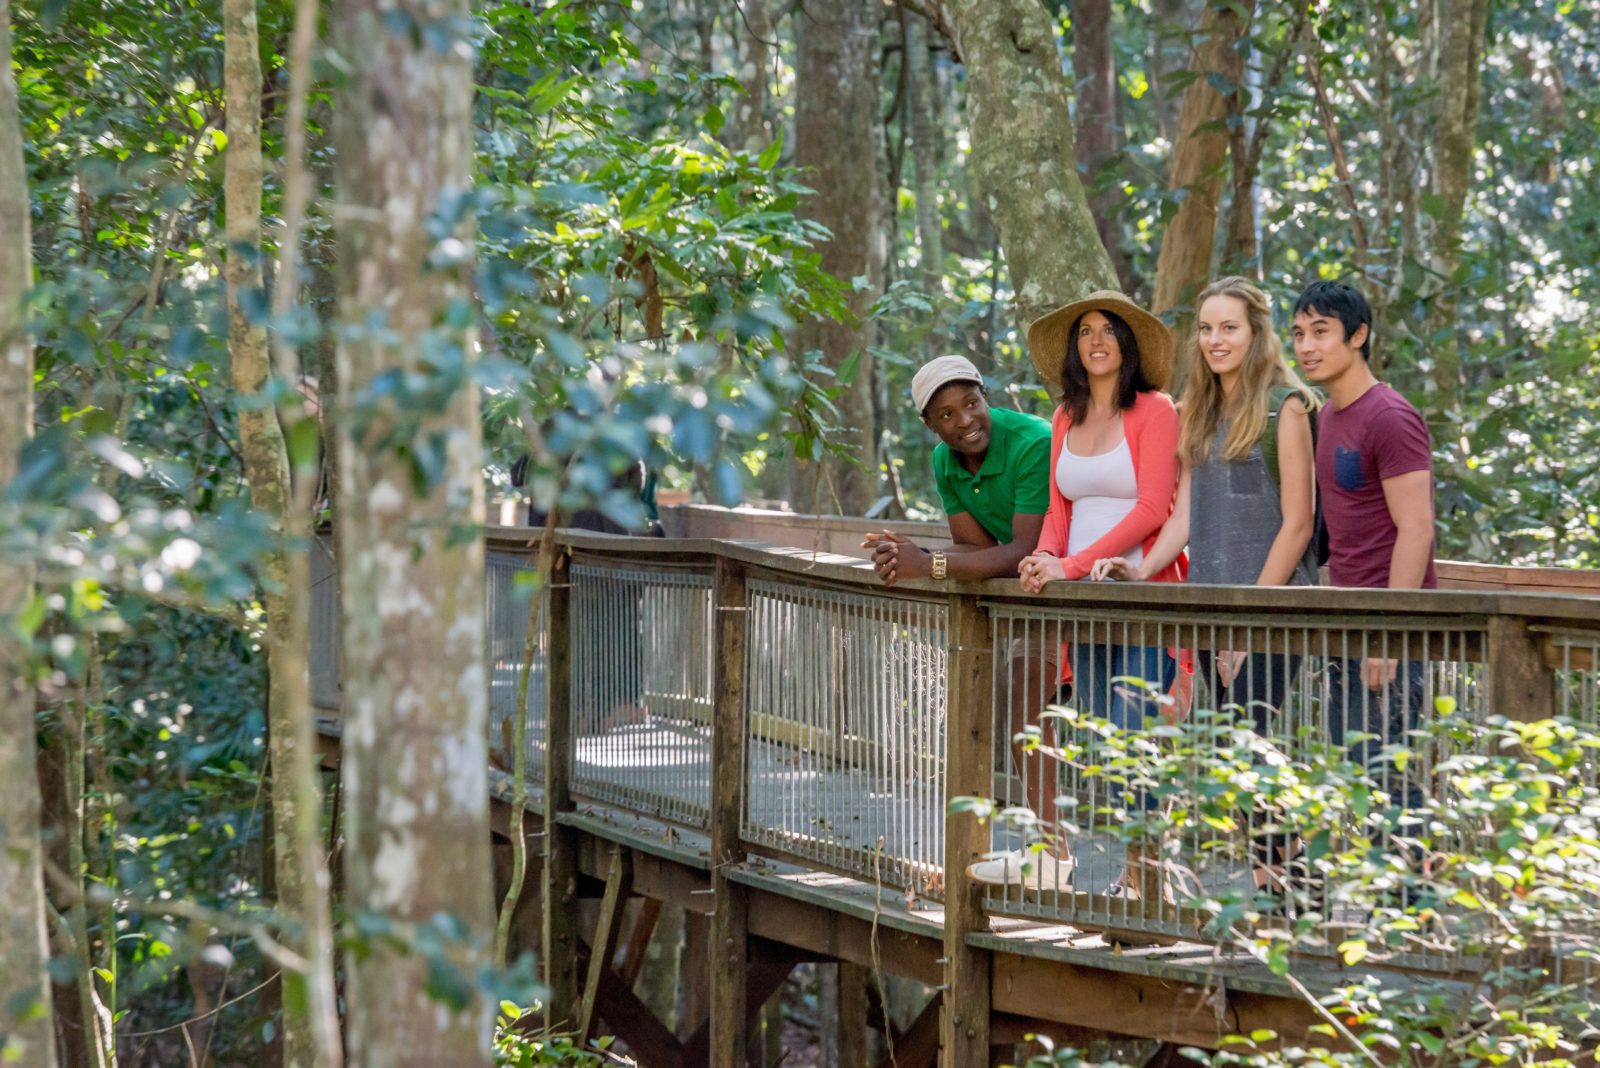 The boardwalk is a 1.3km raised accessible walk through the Rainforest